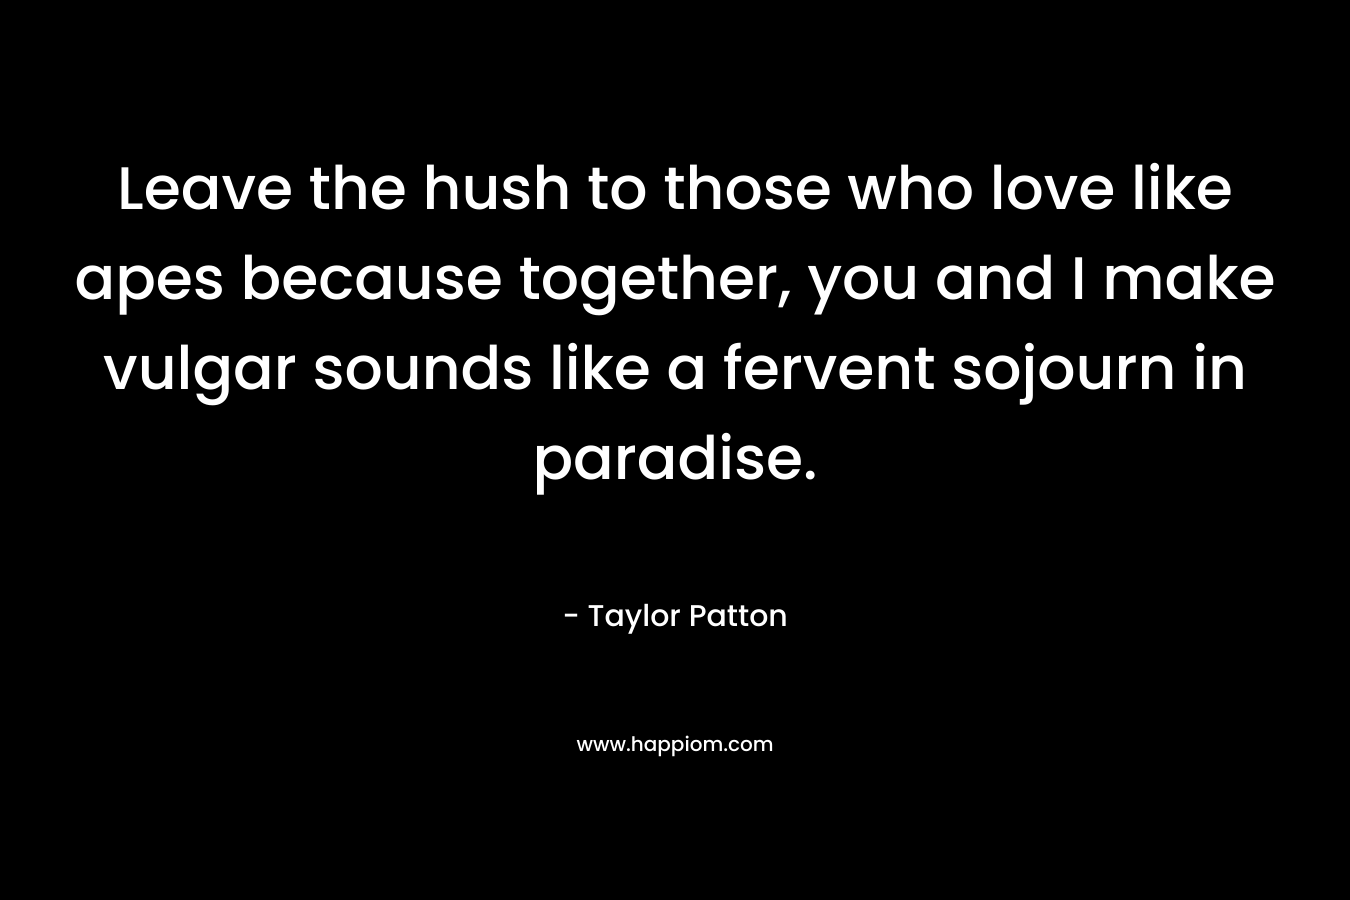 Leave the hush to those who love like apes because together, you and I make vulgar sounds like a fervent sojourn in paradise.